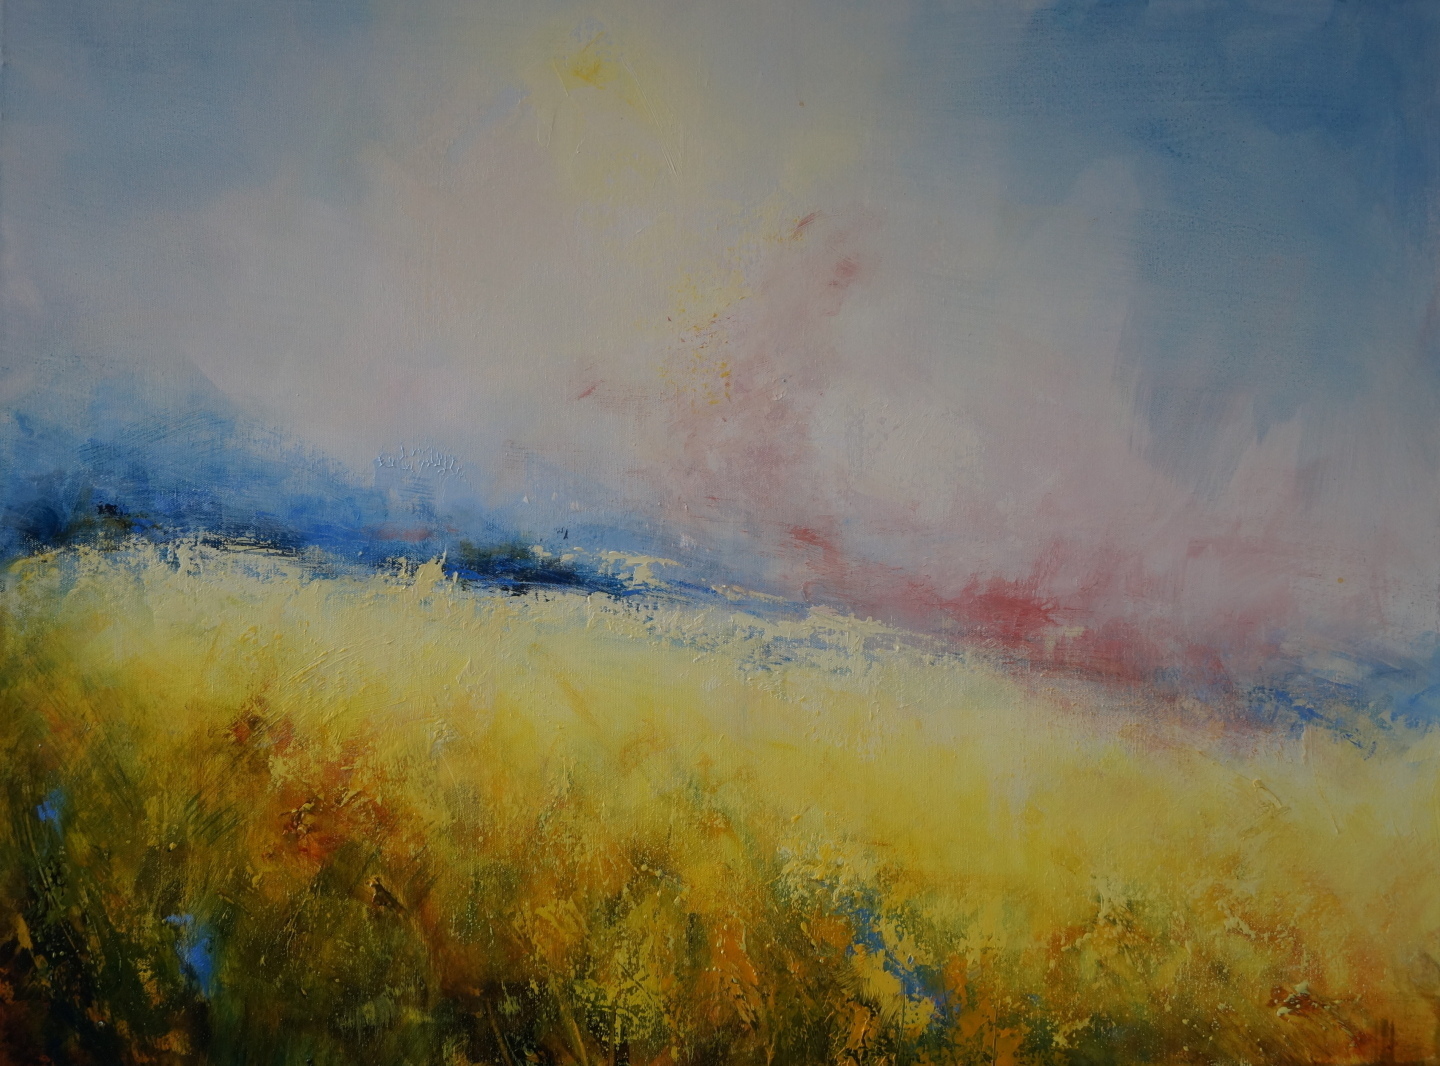 Summer-landscape-meadow-yellow-blue-seascape- sea-blue-purple-Summer-yellow-red-South-downs-moors-Alison-Tyldesley-original-framed-atmosheric-landscapes-impressionism